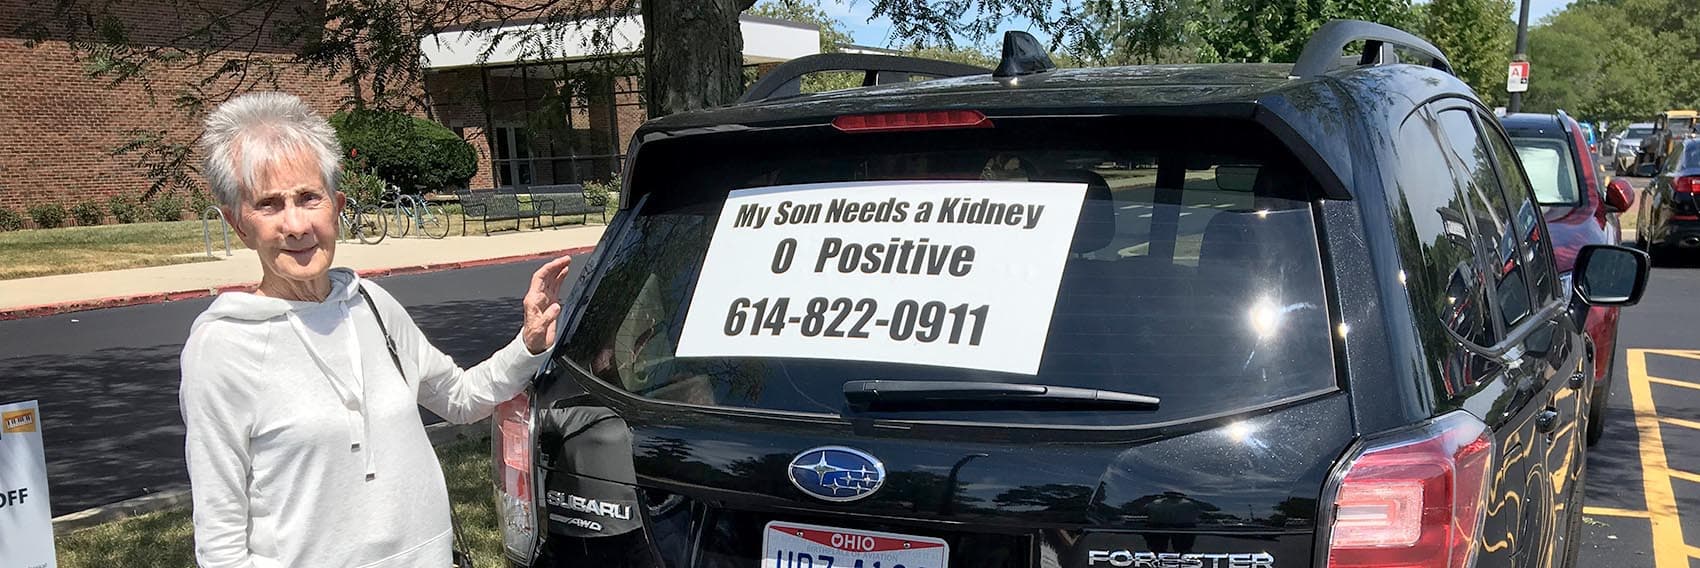 Norma Brickey, 82, has been driving the streets of Columbus, Ohio, with a sign in her car window: &quot;My son needs a kidney, O positive,&quot; followed by her phone number. (Courtesy Eric French)